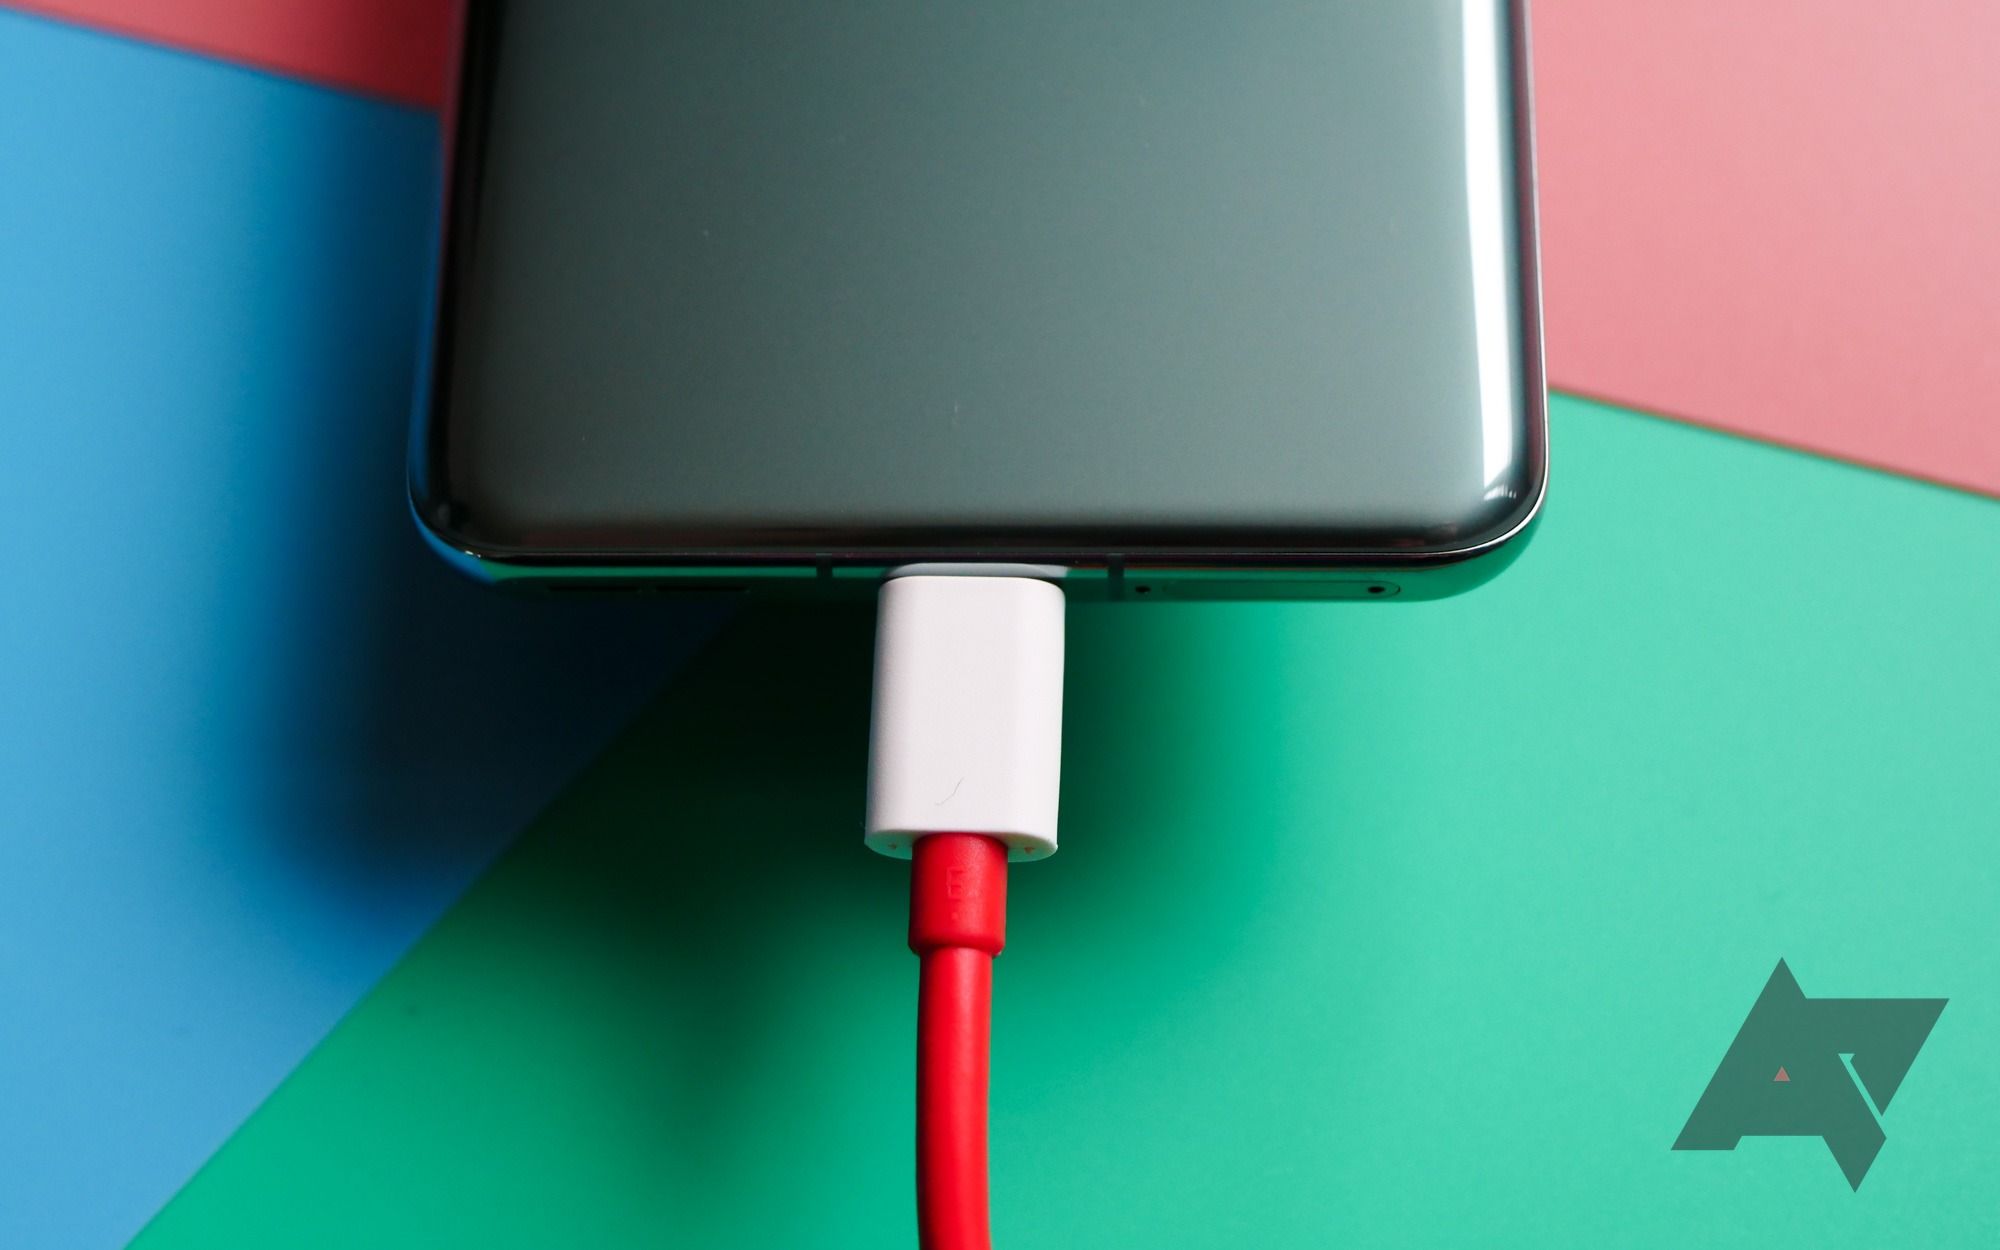 The rear bottom third of a OnePlus 11 smartphone hovers over a tri-colored cardboard background with a white and red USB-C cable plugged in